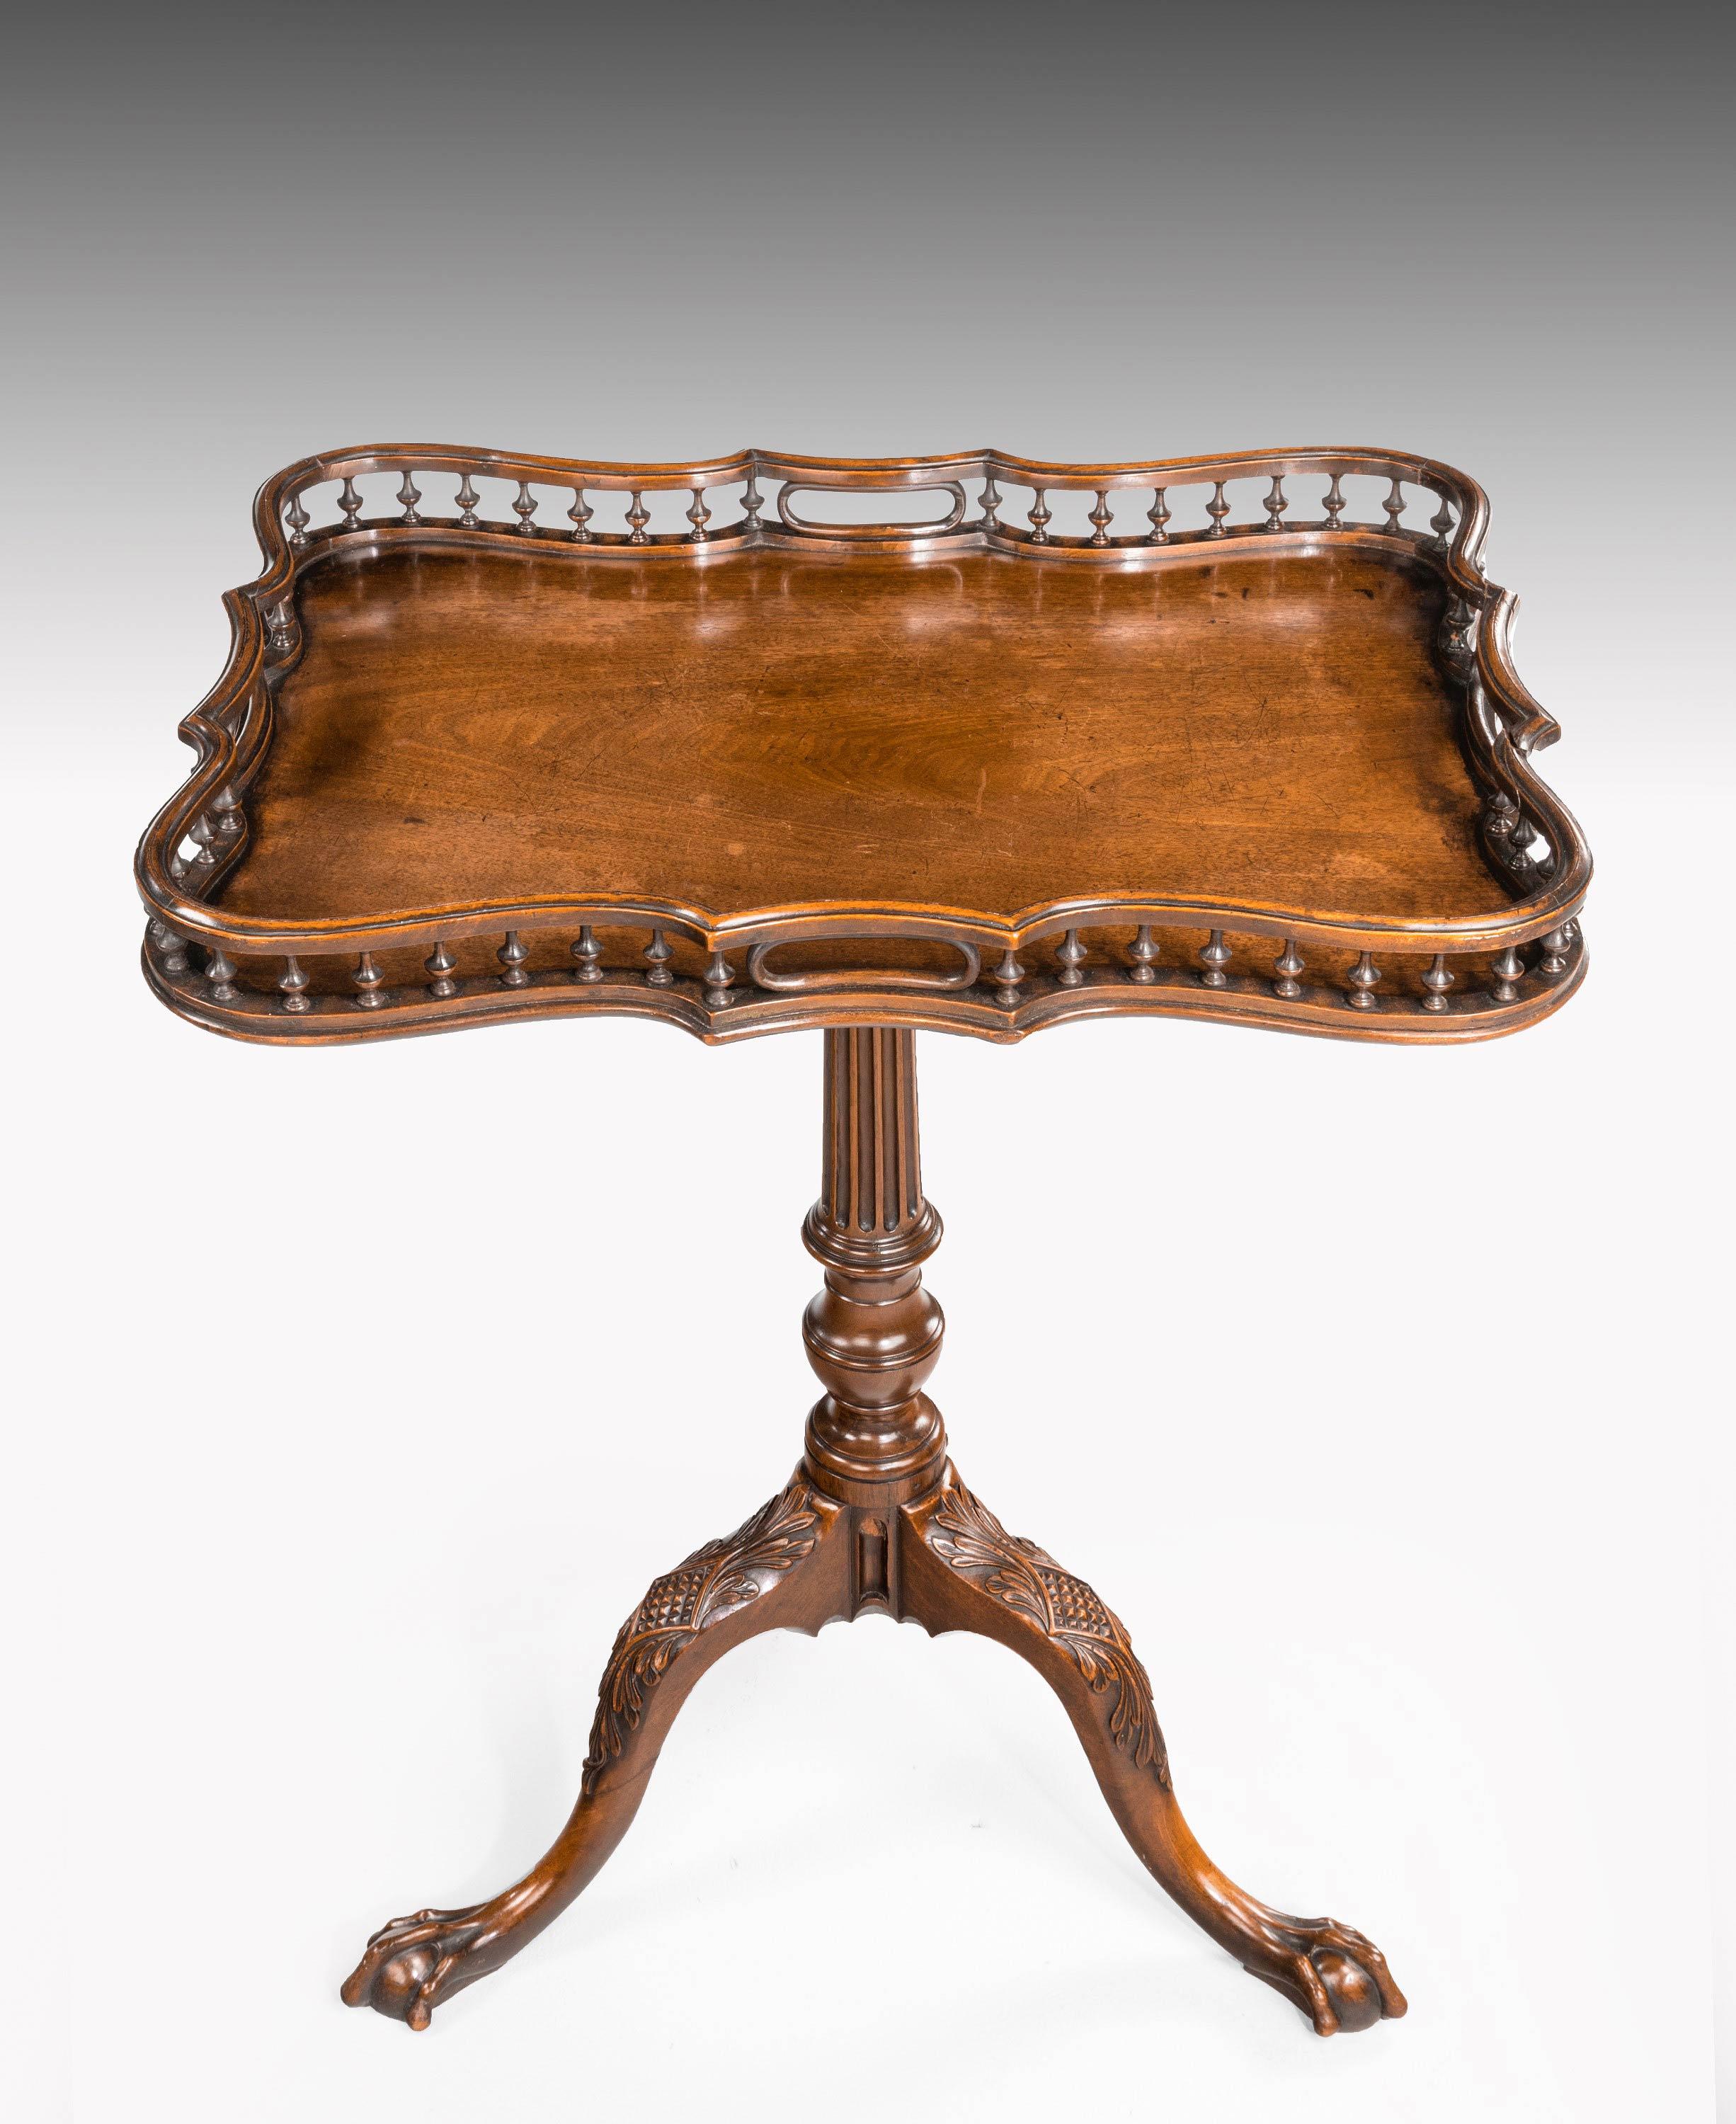 Late 18th Century Chippendale Period Tripod Table For Sale